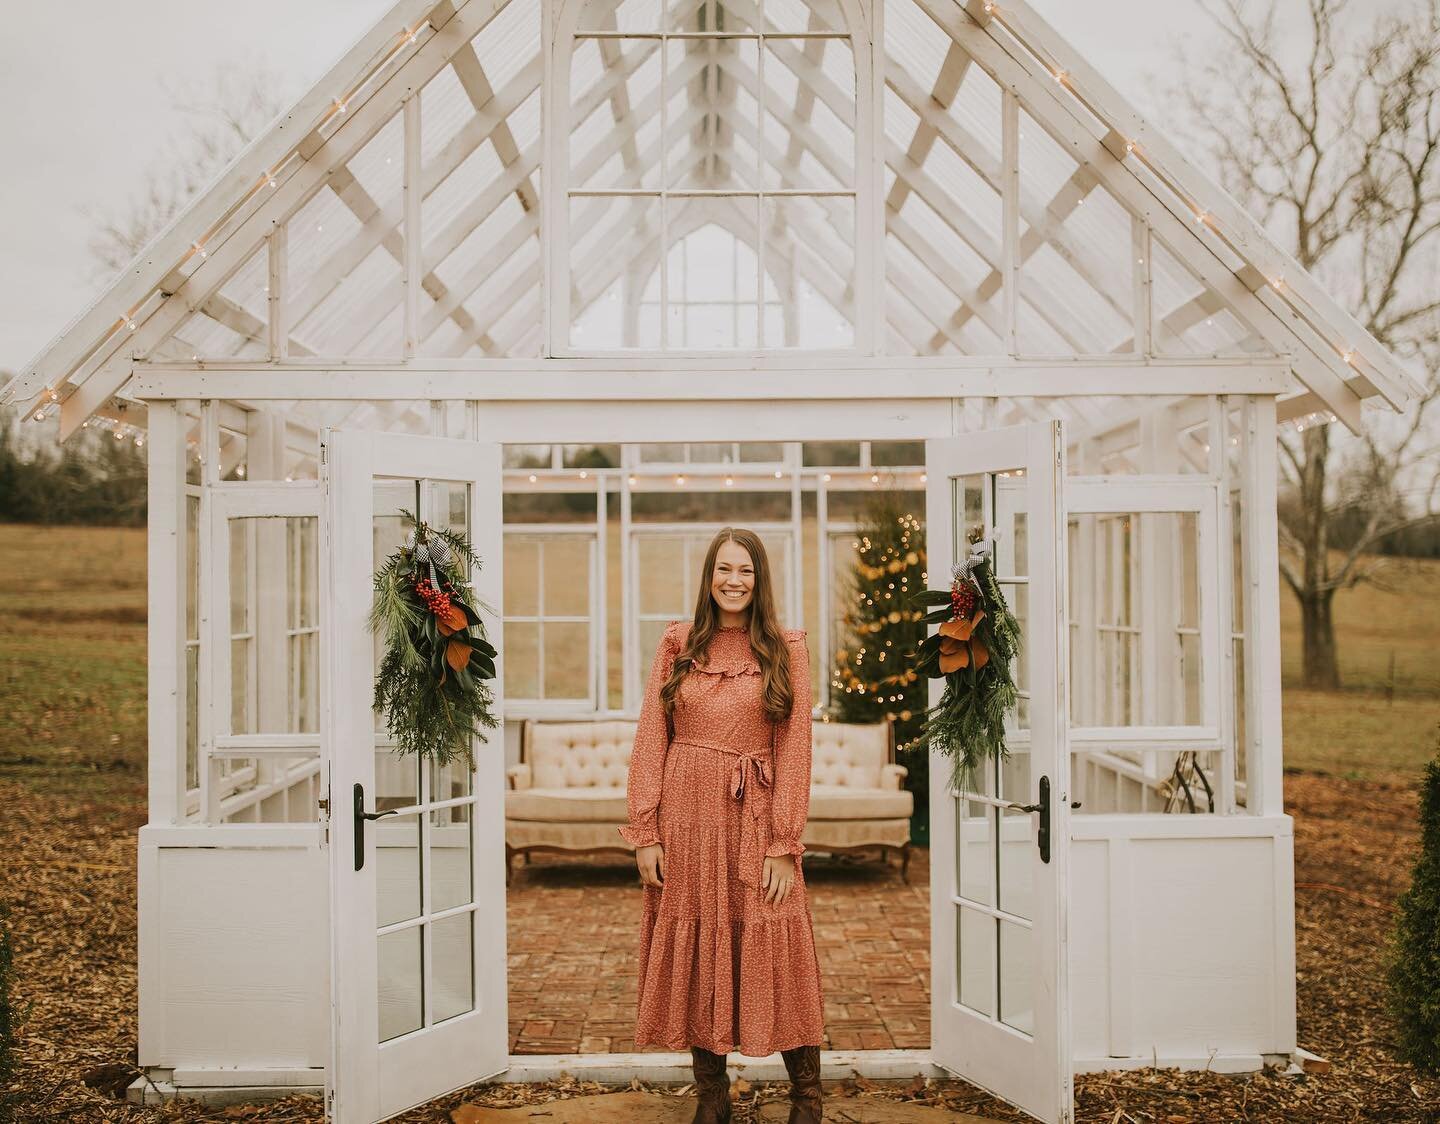 Building the greenhouse was definitely a labor of love. Most all of the materials were repurposed which I feel like just adds its quaintness. We collected the windows from a historic home right here in Russellville, the arch windows in the peaks are 